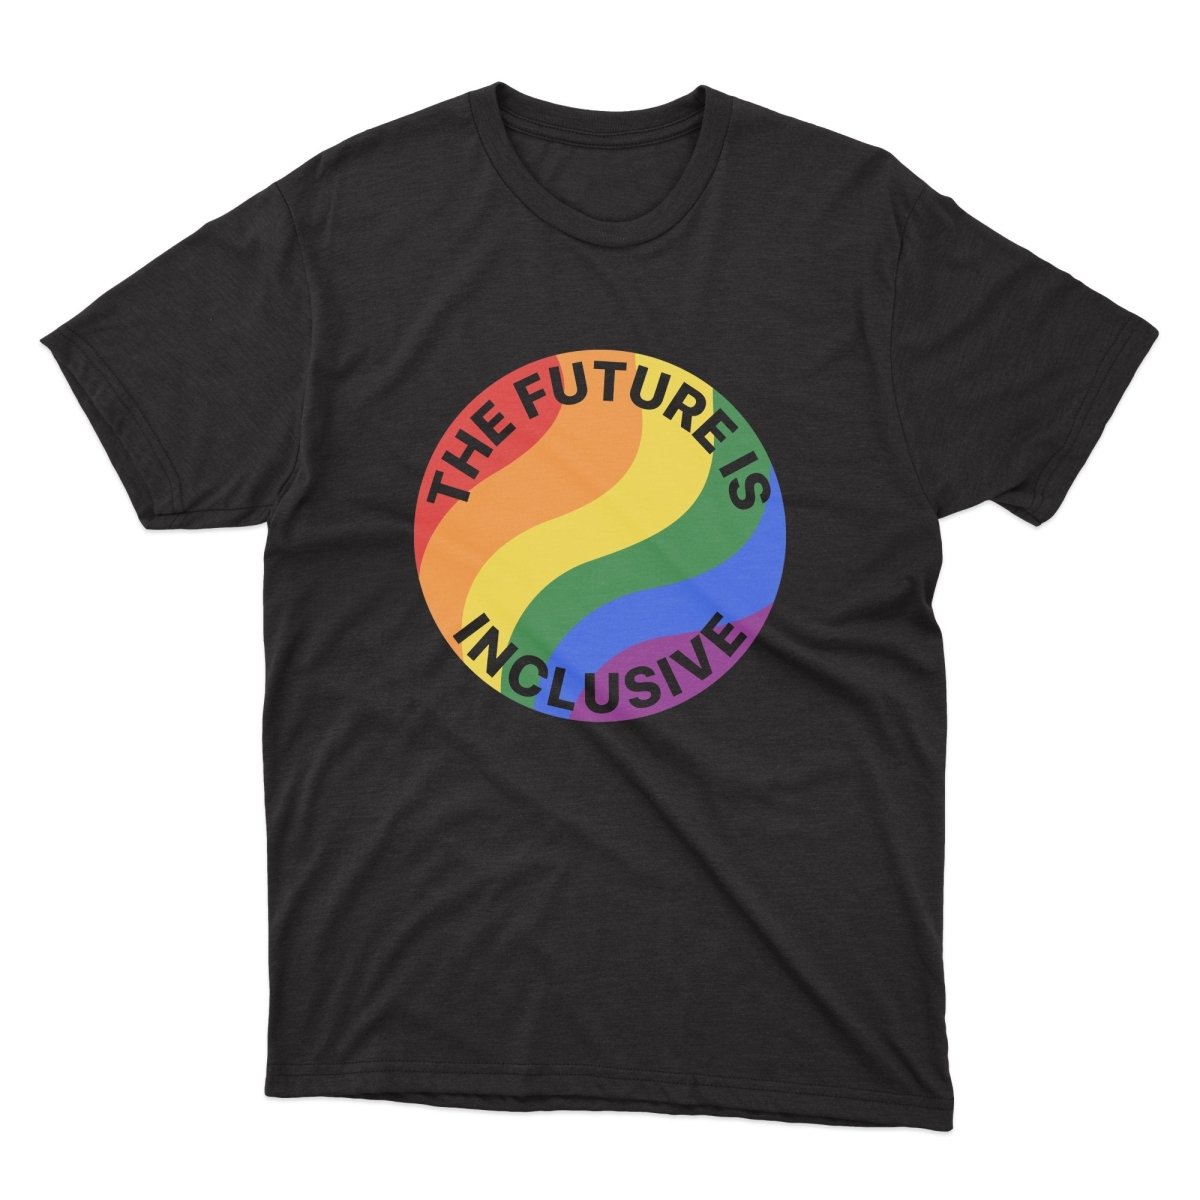 The Future Is Inclusive Shirt - stickerbullThe Future Is Inclusive ShirtShirtsPrintifystickerbull22562903150725345589BlackSa black t - shirt with the words the future is inclusive on it